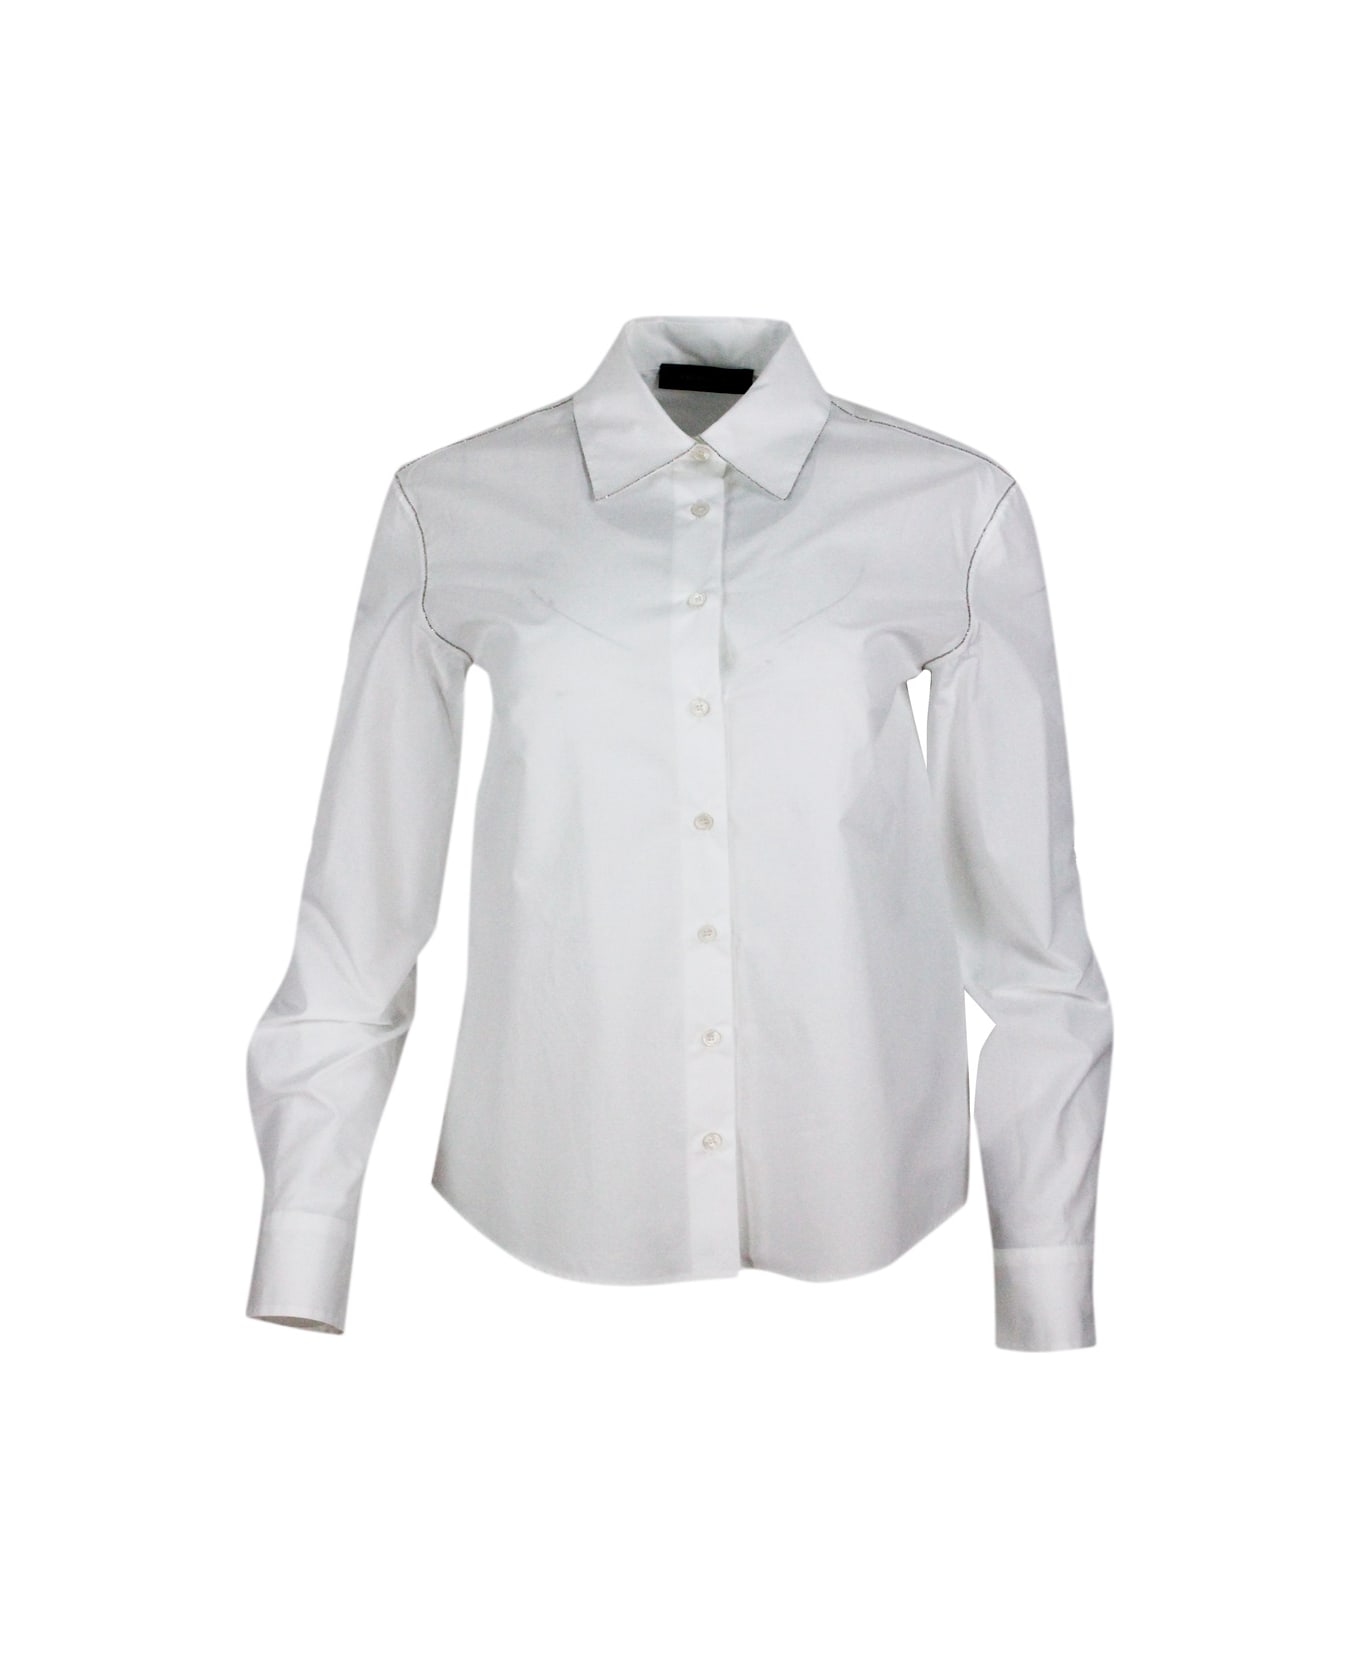 Fabiana Filippi Long-sleeved Shirt In Stretch Cotton Poplin With A Slim Fit Trimmed With Rows Of Brilliant Jewels - White